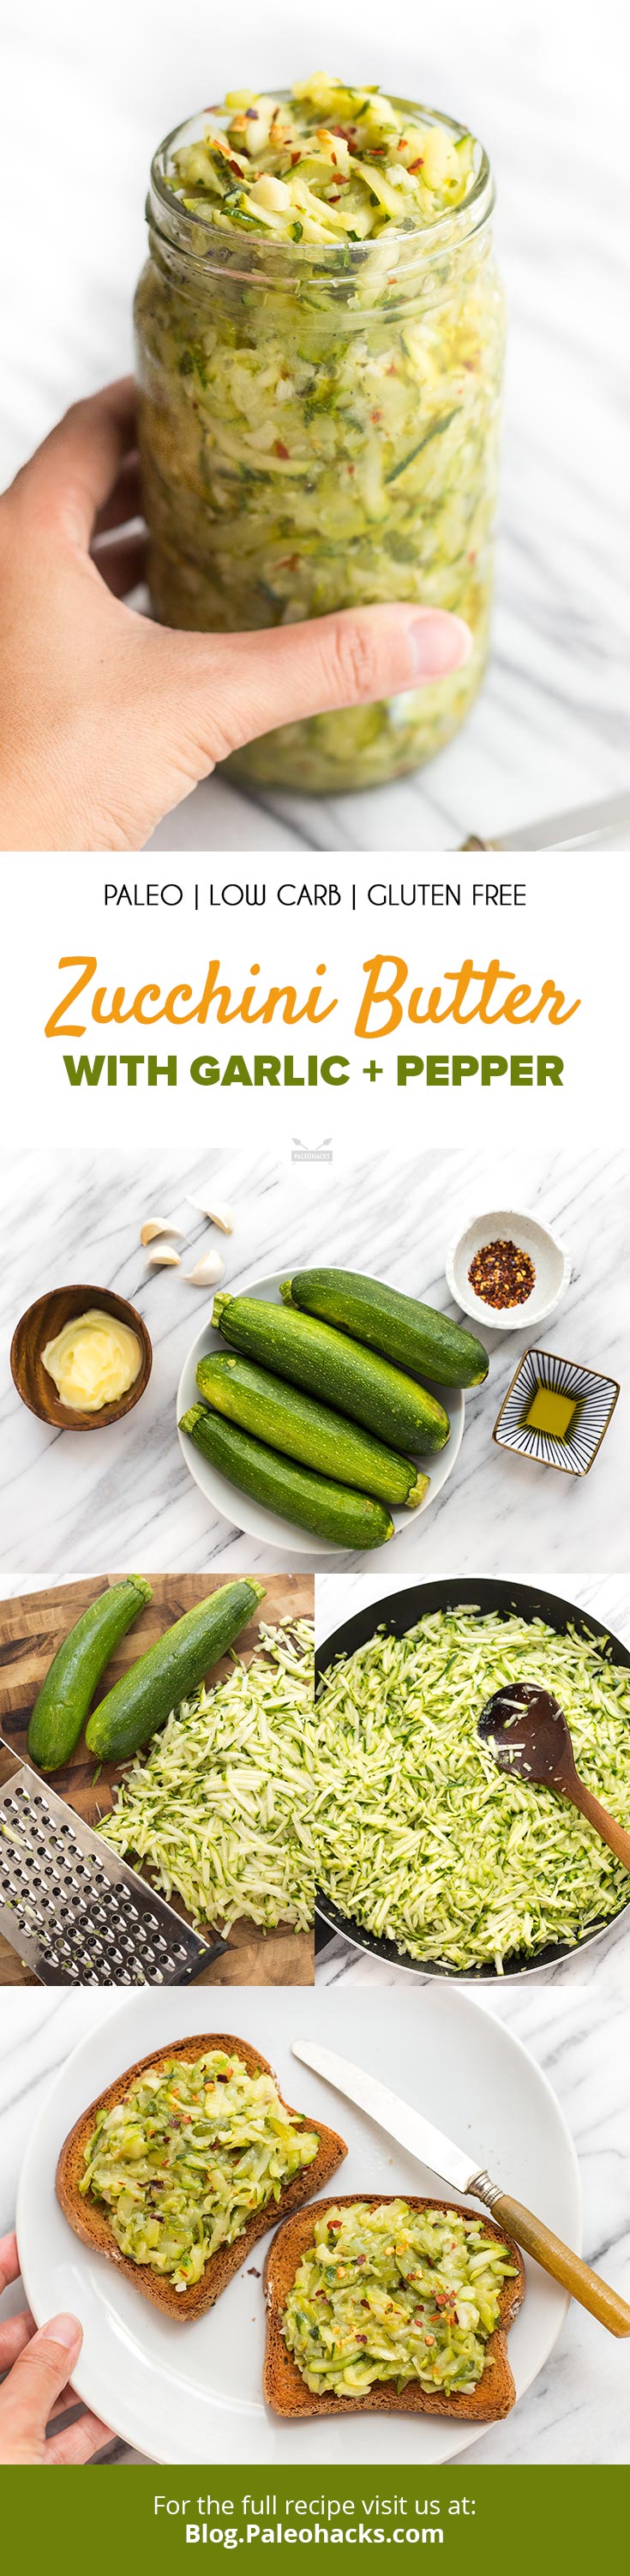 Spread this Zucchini Butter on your favorite Paleo bread to instantly transform your morning toast. Get your nutrients on!